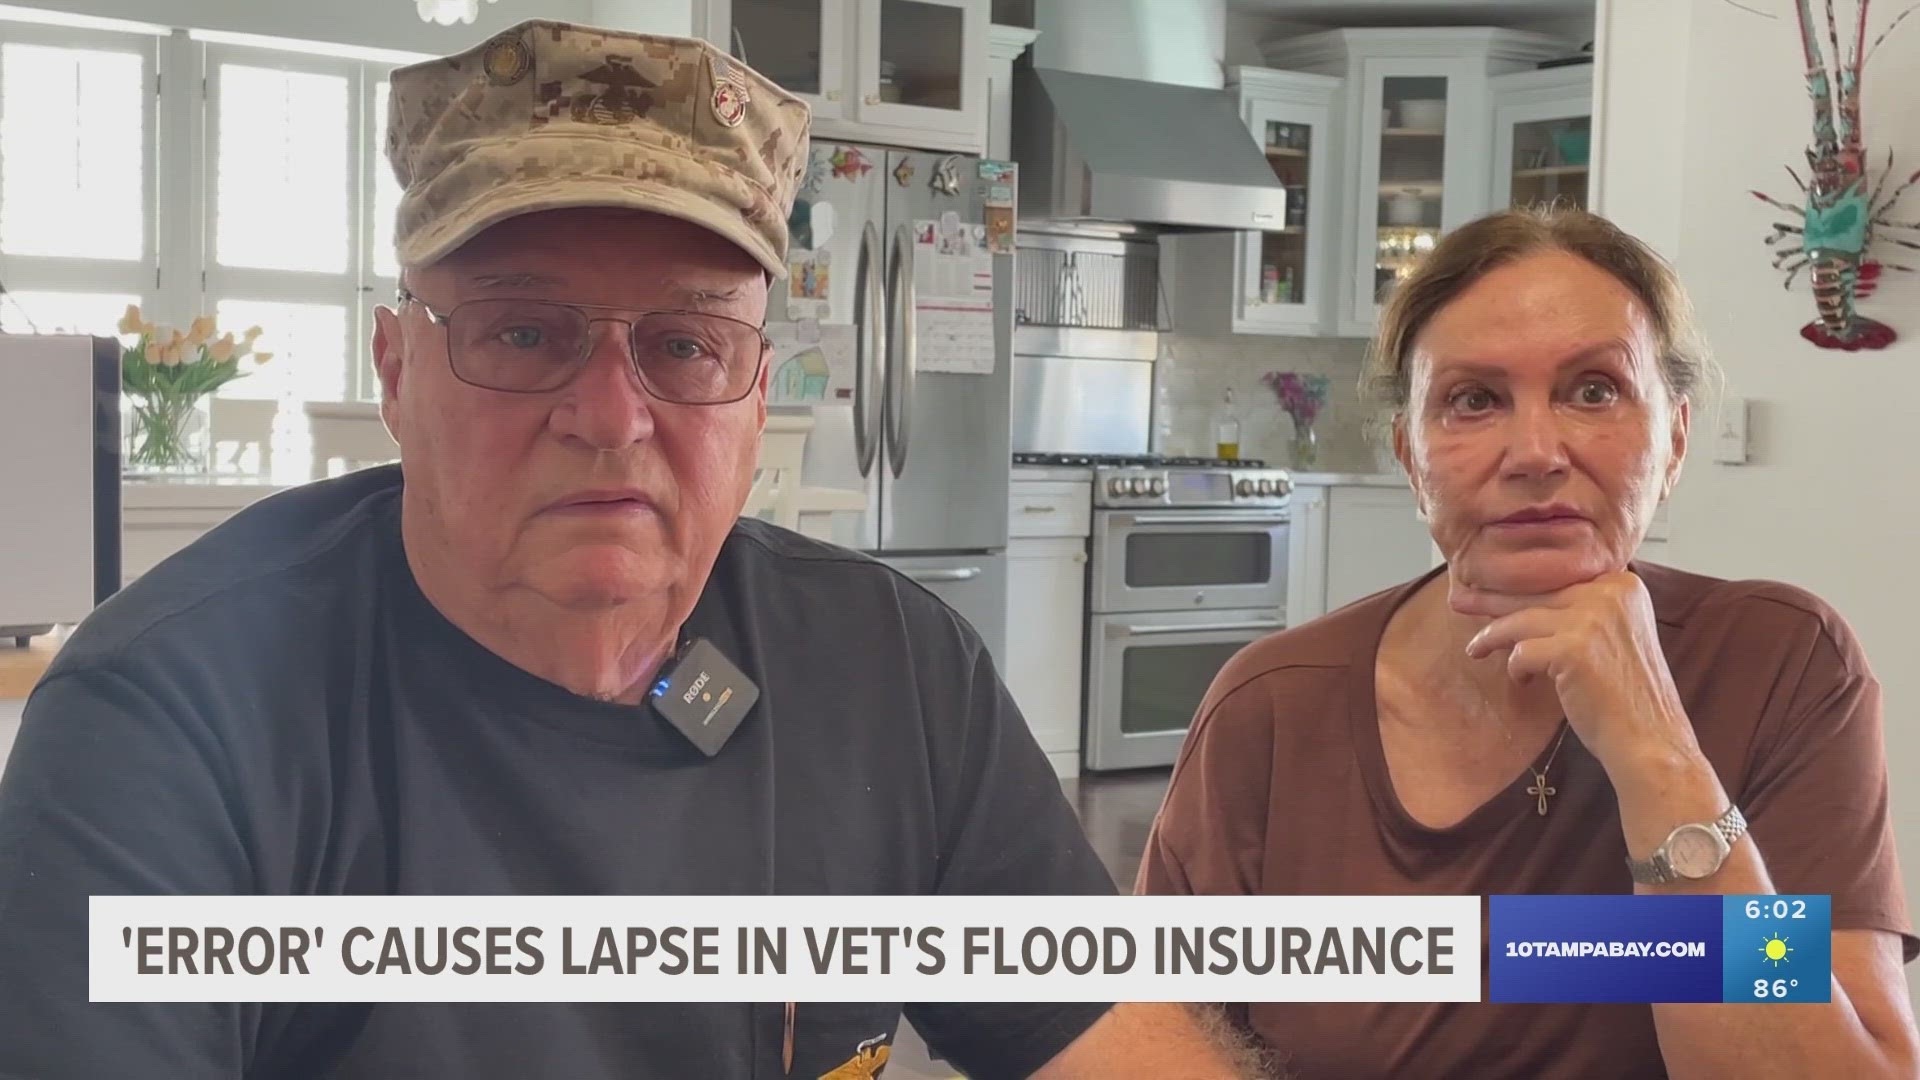 John and Rosemarie Gregory tried to file a claim with their flood insurer after Hurricane Idalia. Their insurer then said they didn't have an active policy.